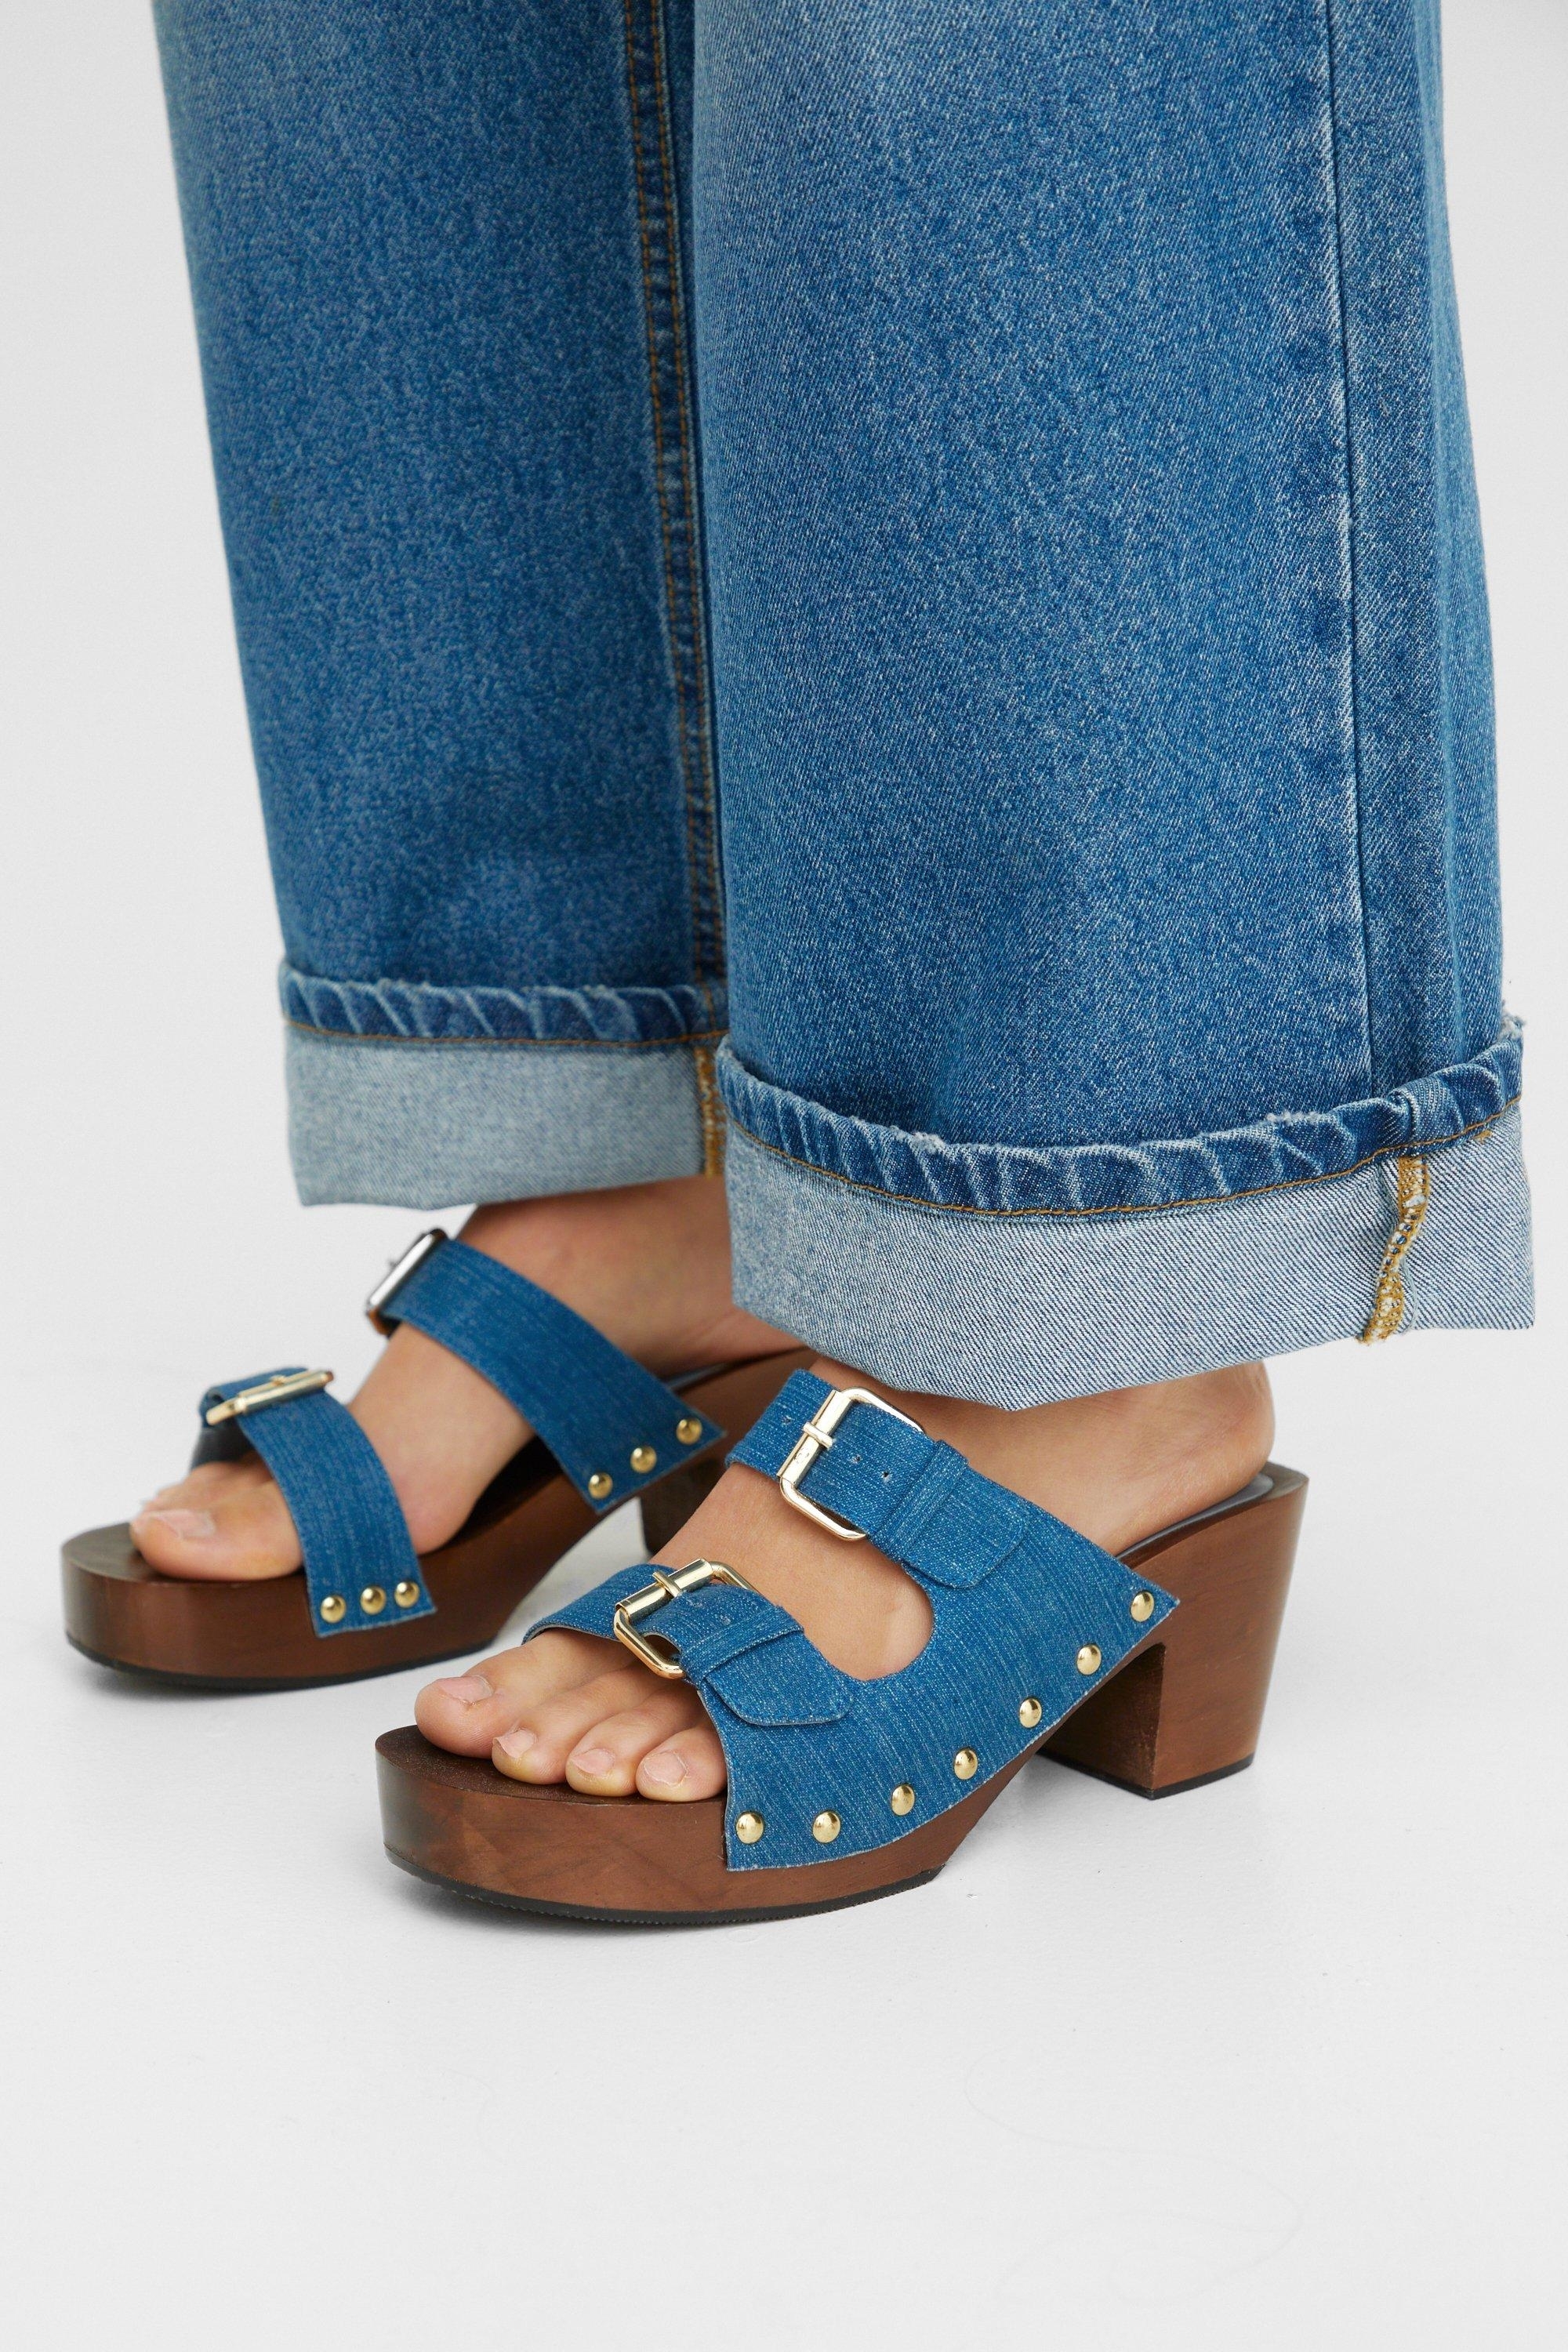 Person wearing blue jeans and brown heeled sandals with buckle details